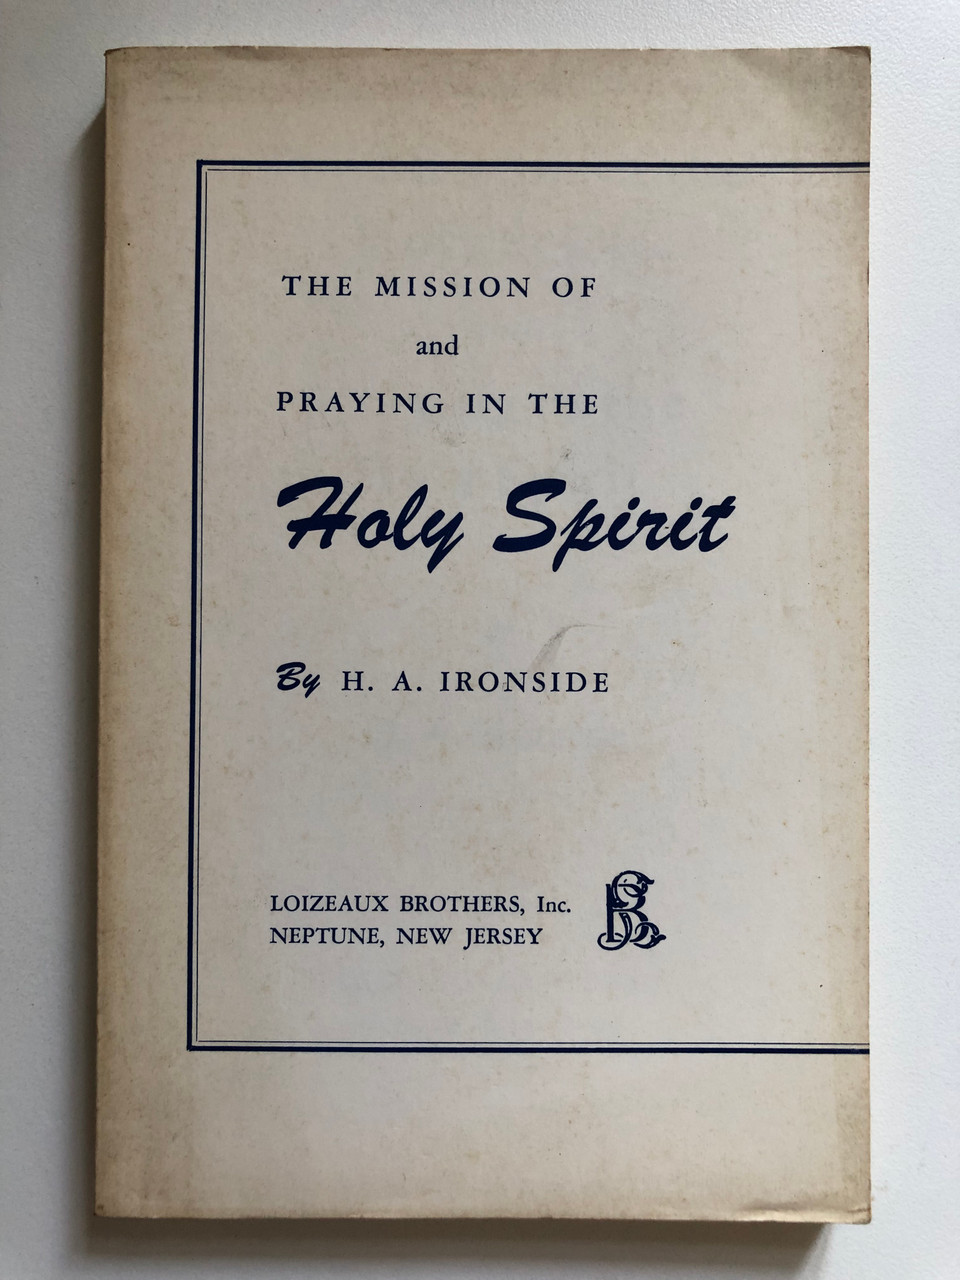 The_Mission_of_and_Praying_in_the_Holy_Spirit_by_H._A._Ironside_The_Holy_Spirits_Mission_to_the_World_Publisher_Loizeaux_Brothers_January_1_1970_HAIronside_2__77540.1691297396.1280.1280.JPG (960×1280)